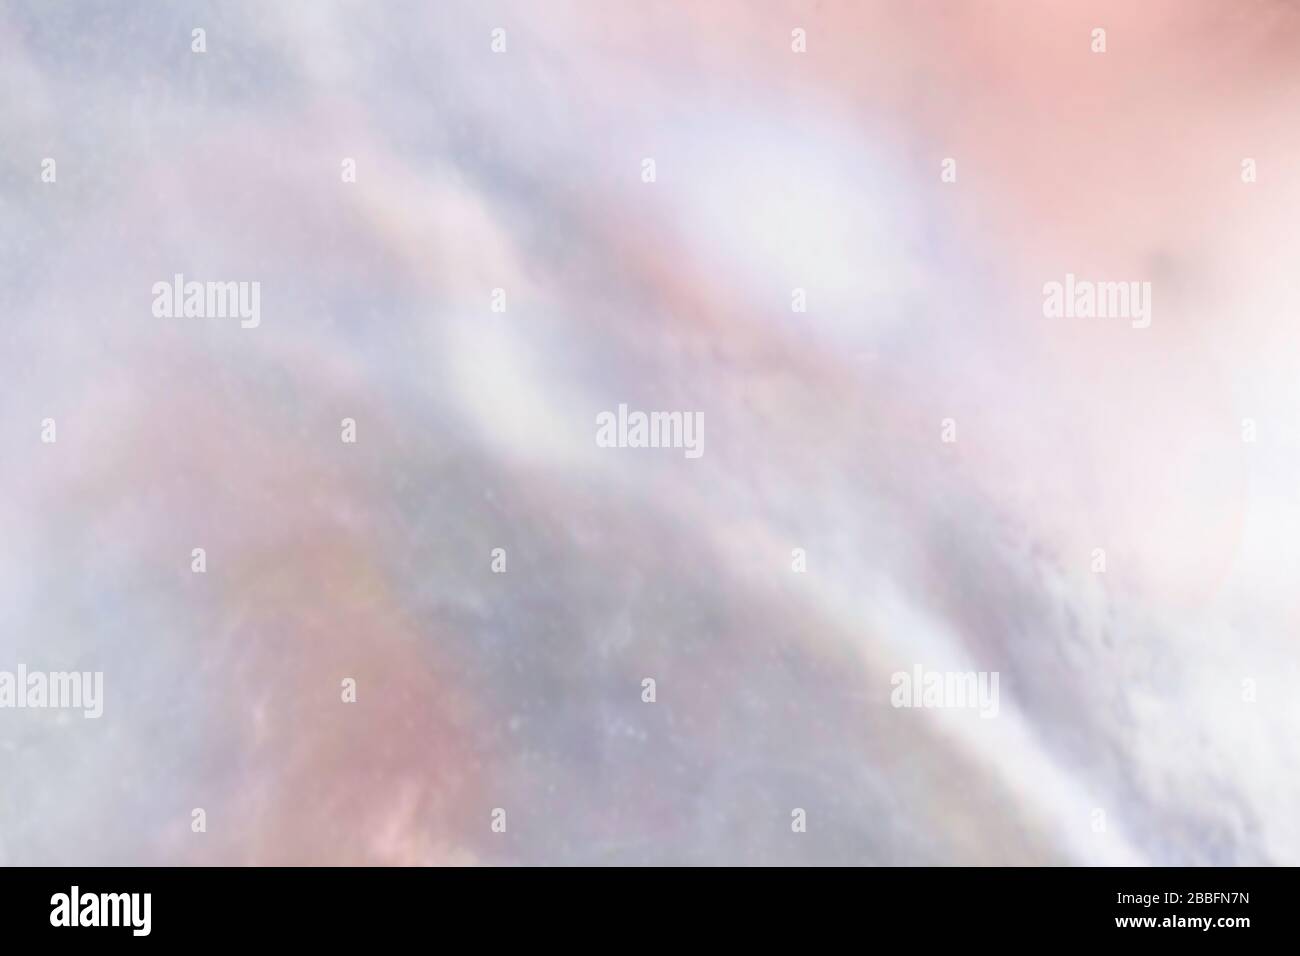 Abstract cloudy blur texture pearl background with shimmering hues of mauve, peach and ocean blue colors Stock Photo